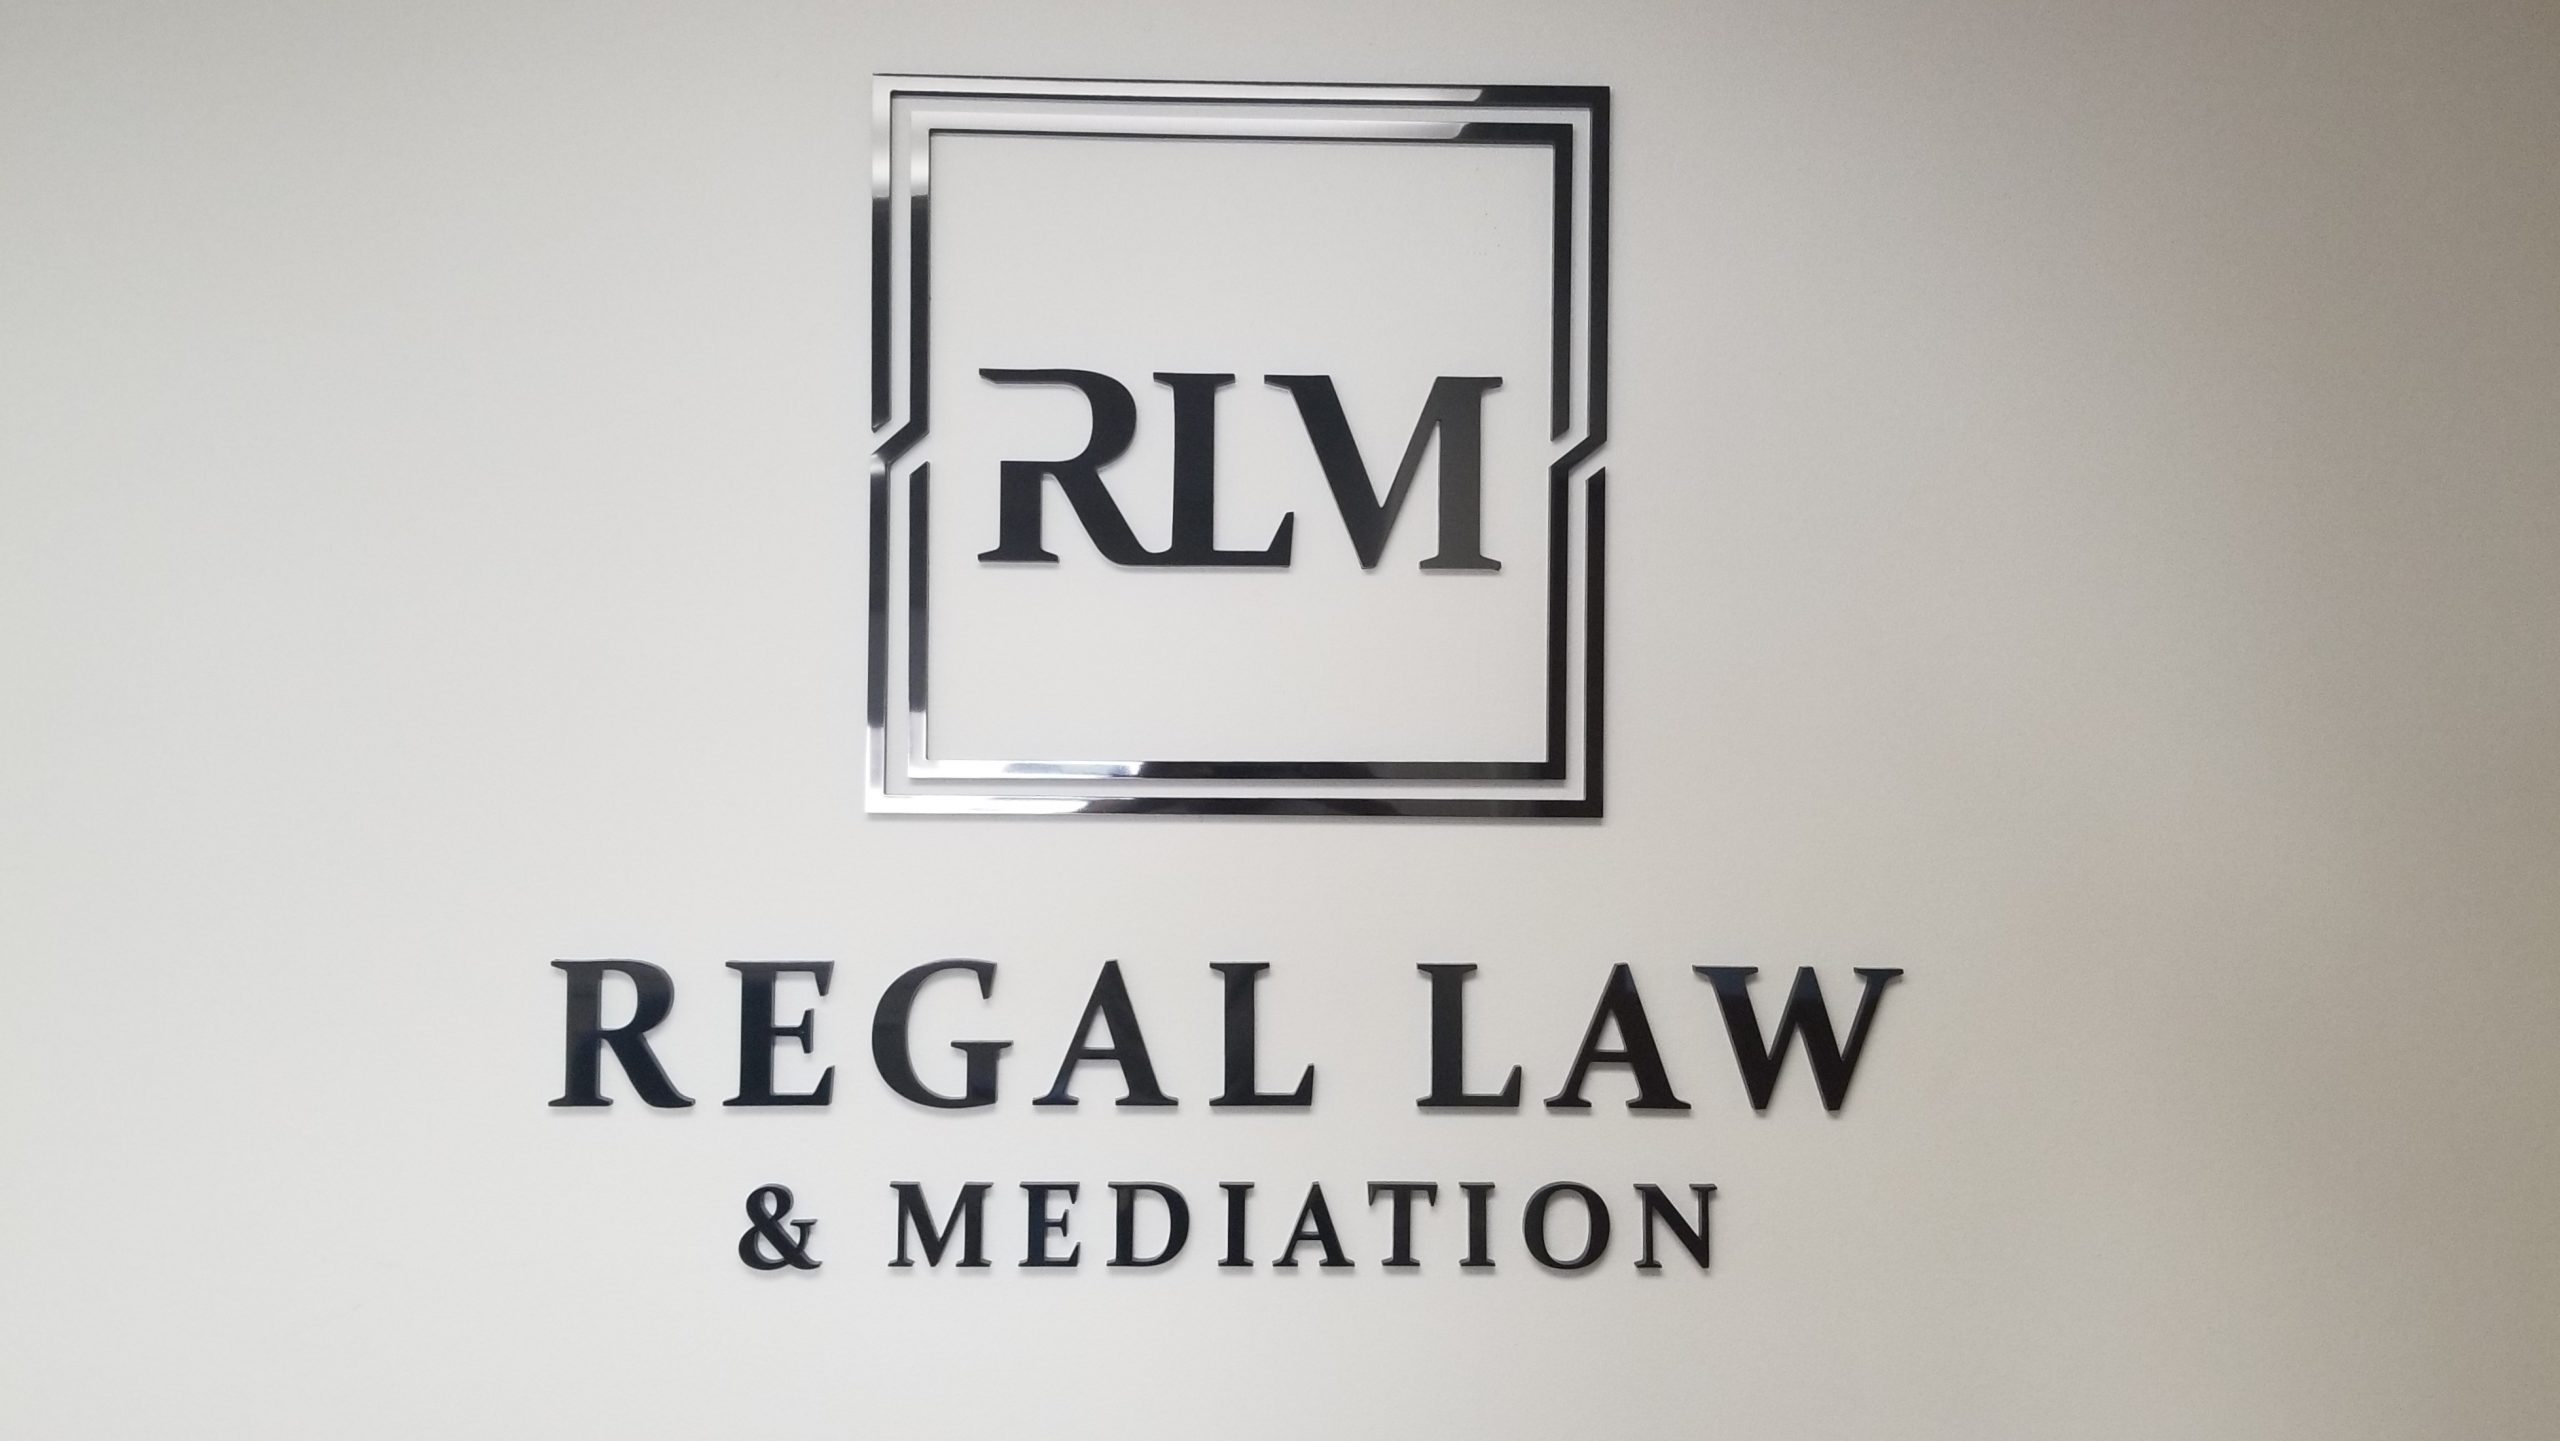 Law firm lobby signs are a must for any legal practice that wants to impress potential clients and show off the caliber of their services!